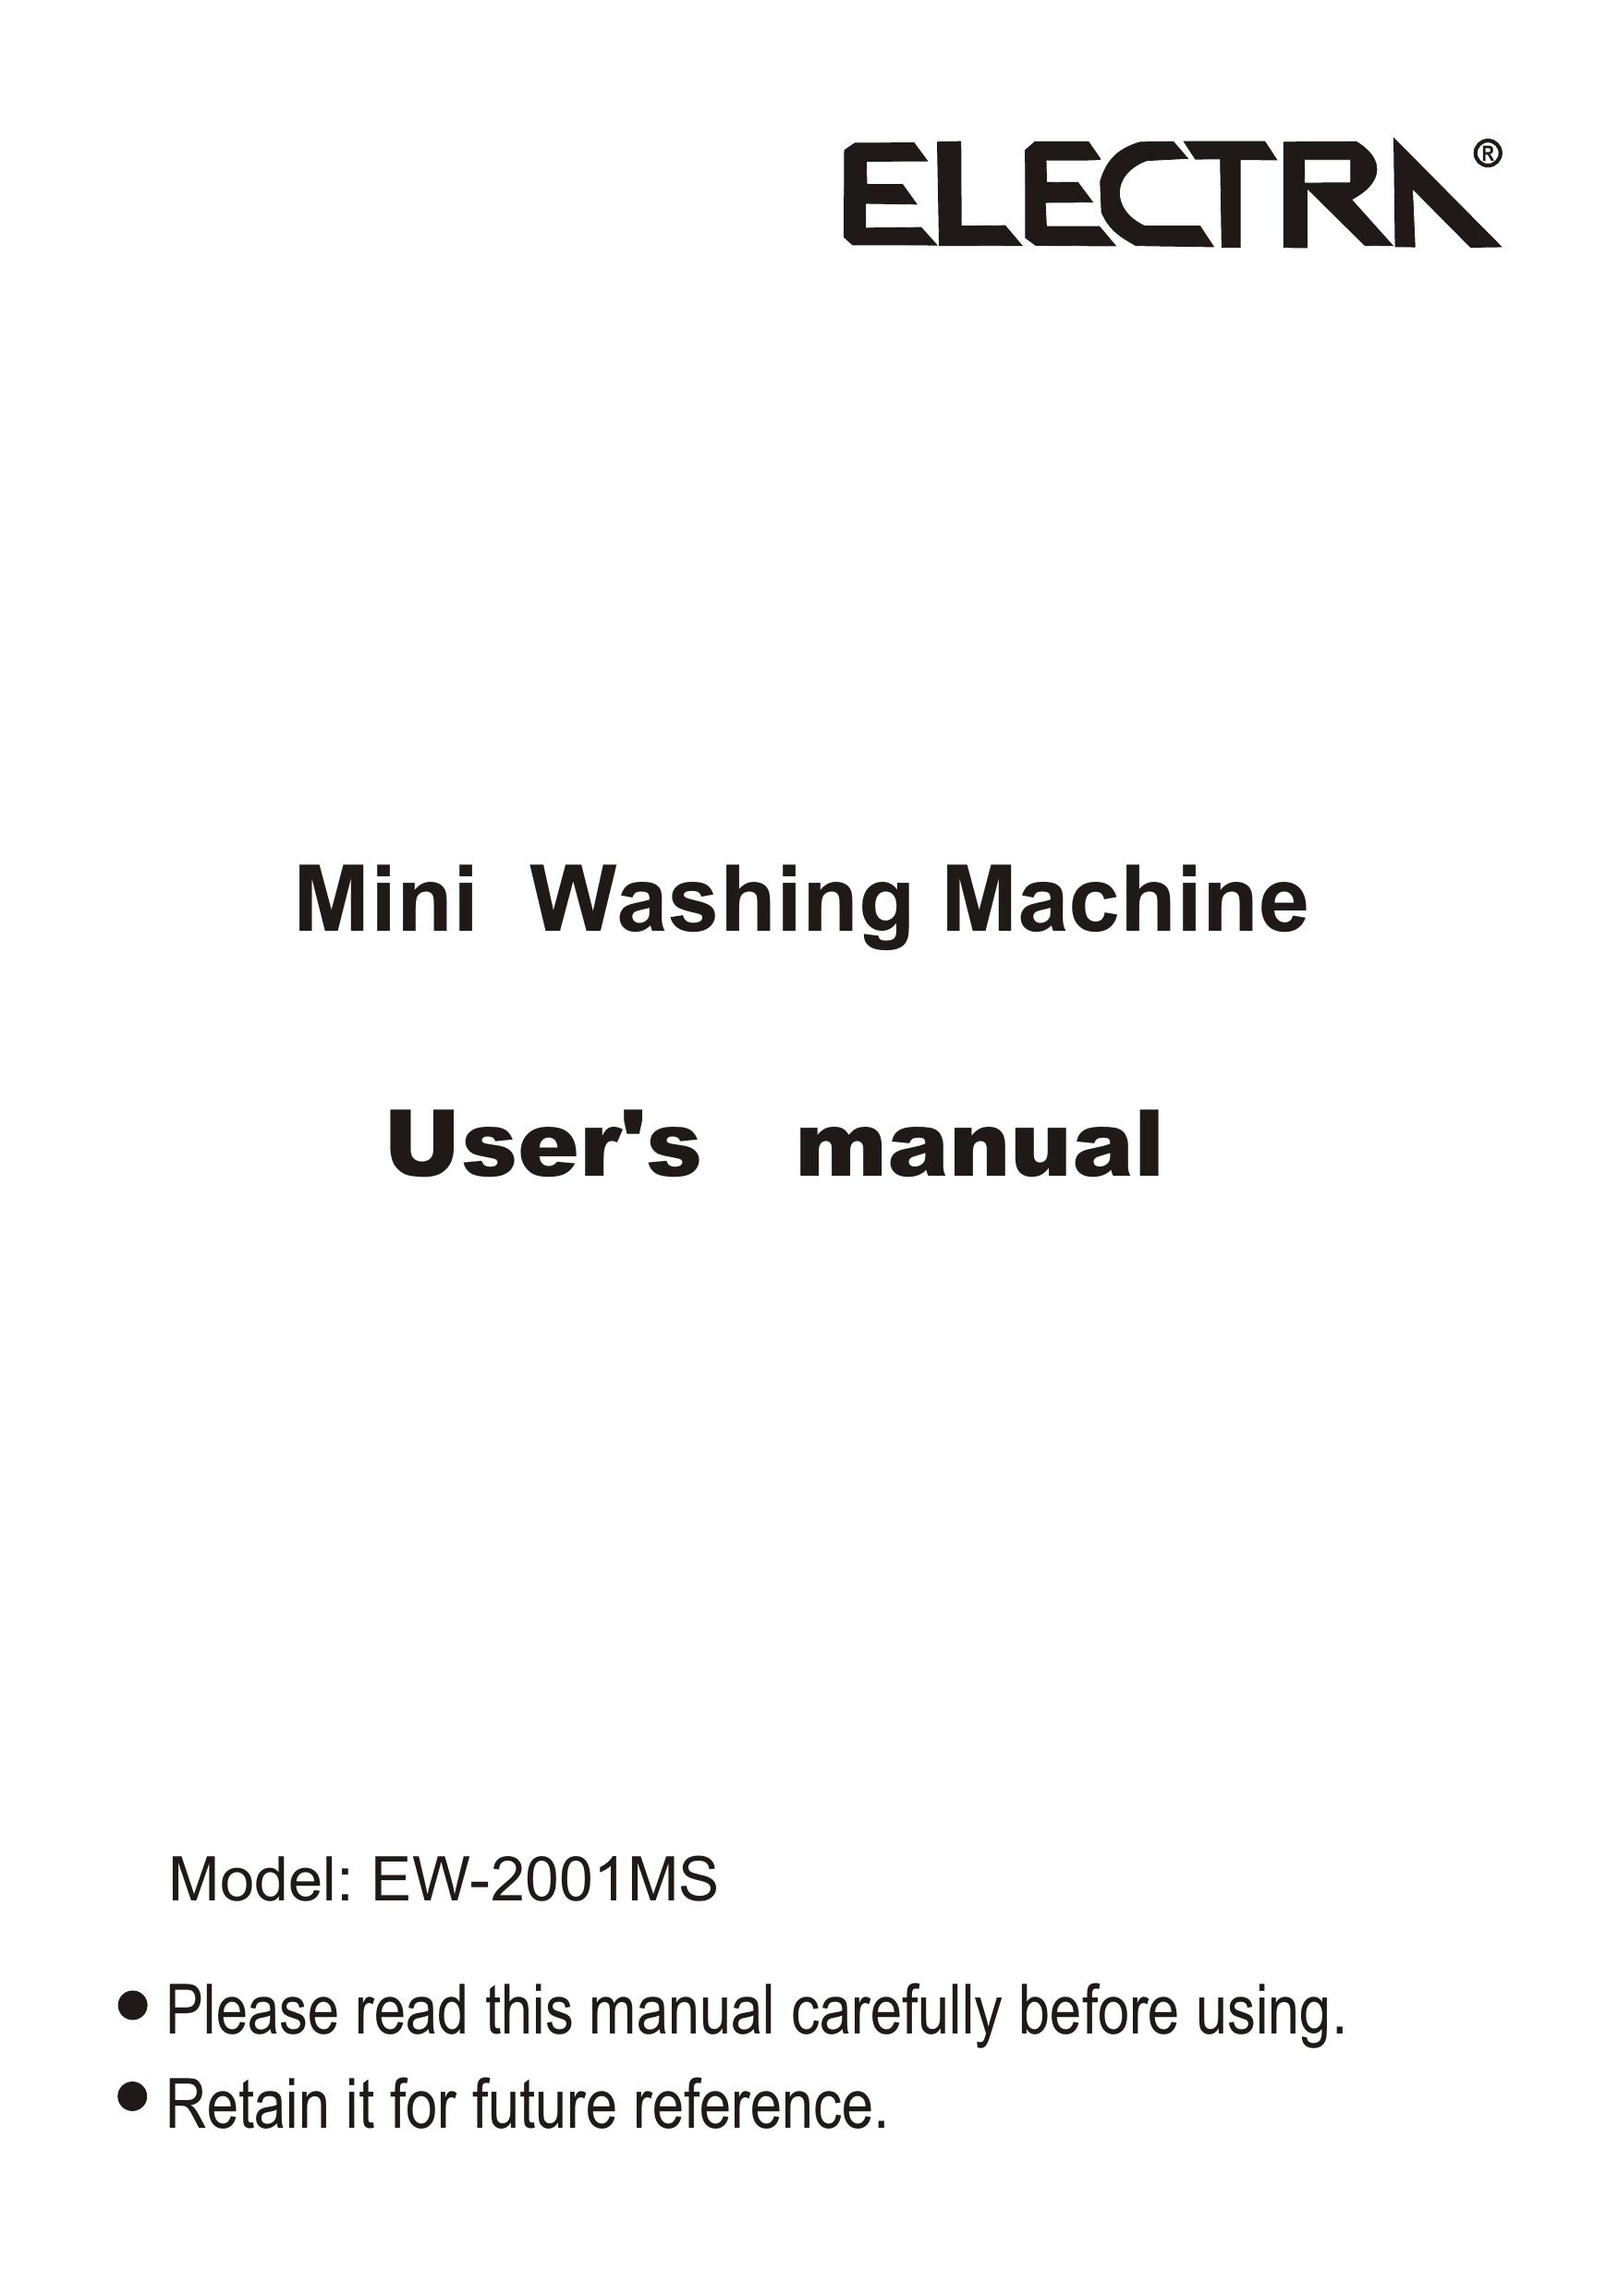 Electra Accessories EW-2001MS Washer/Dryer User Manual